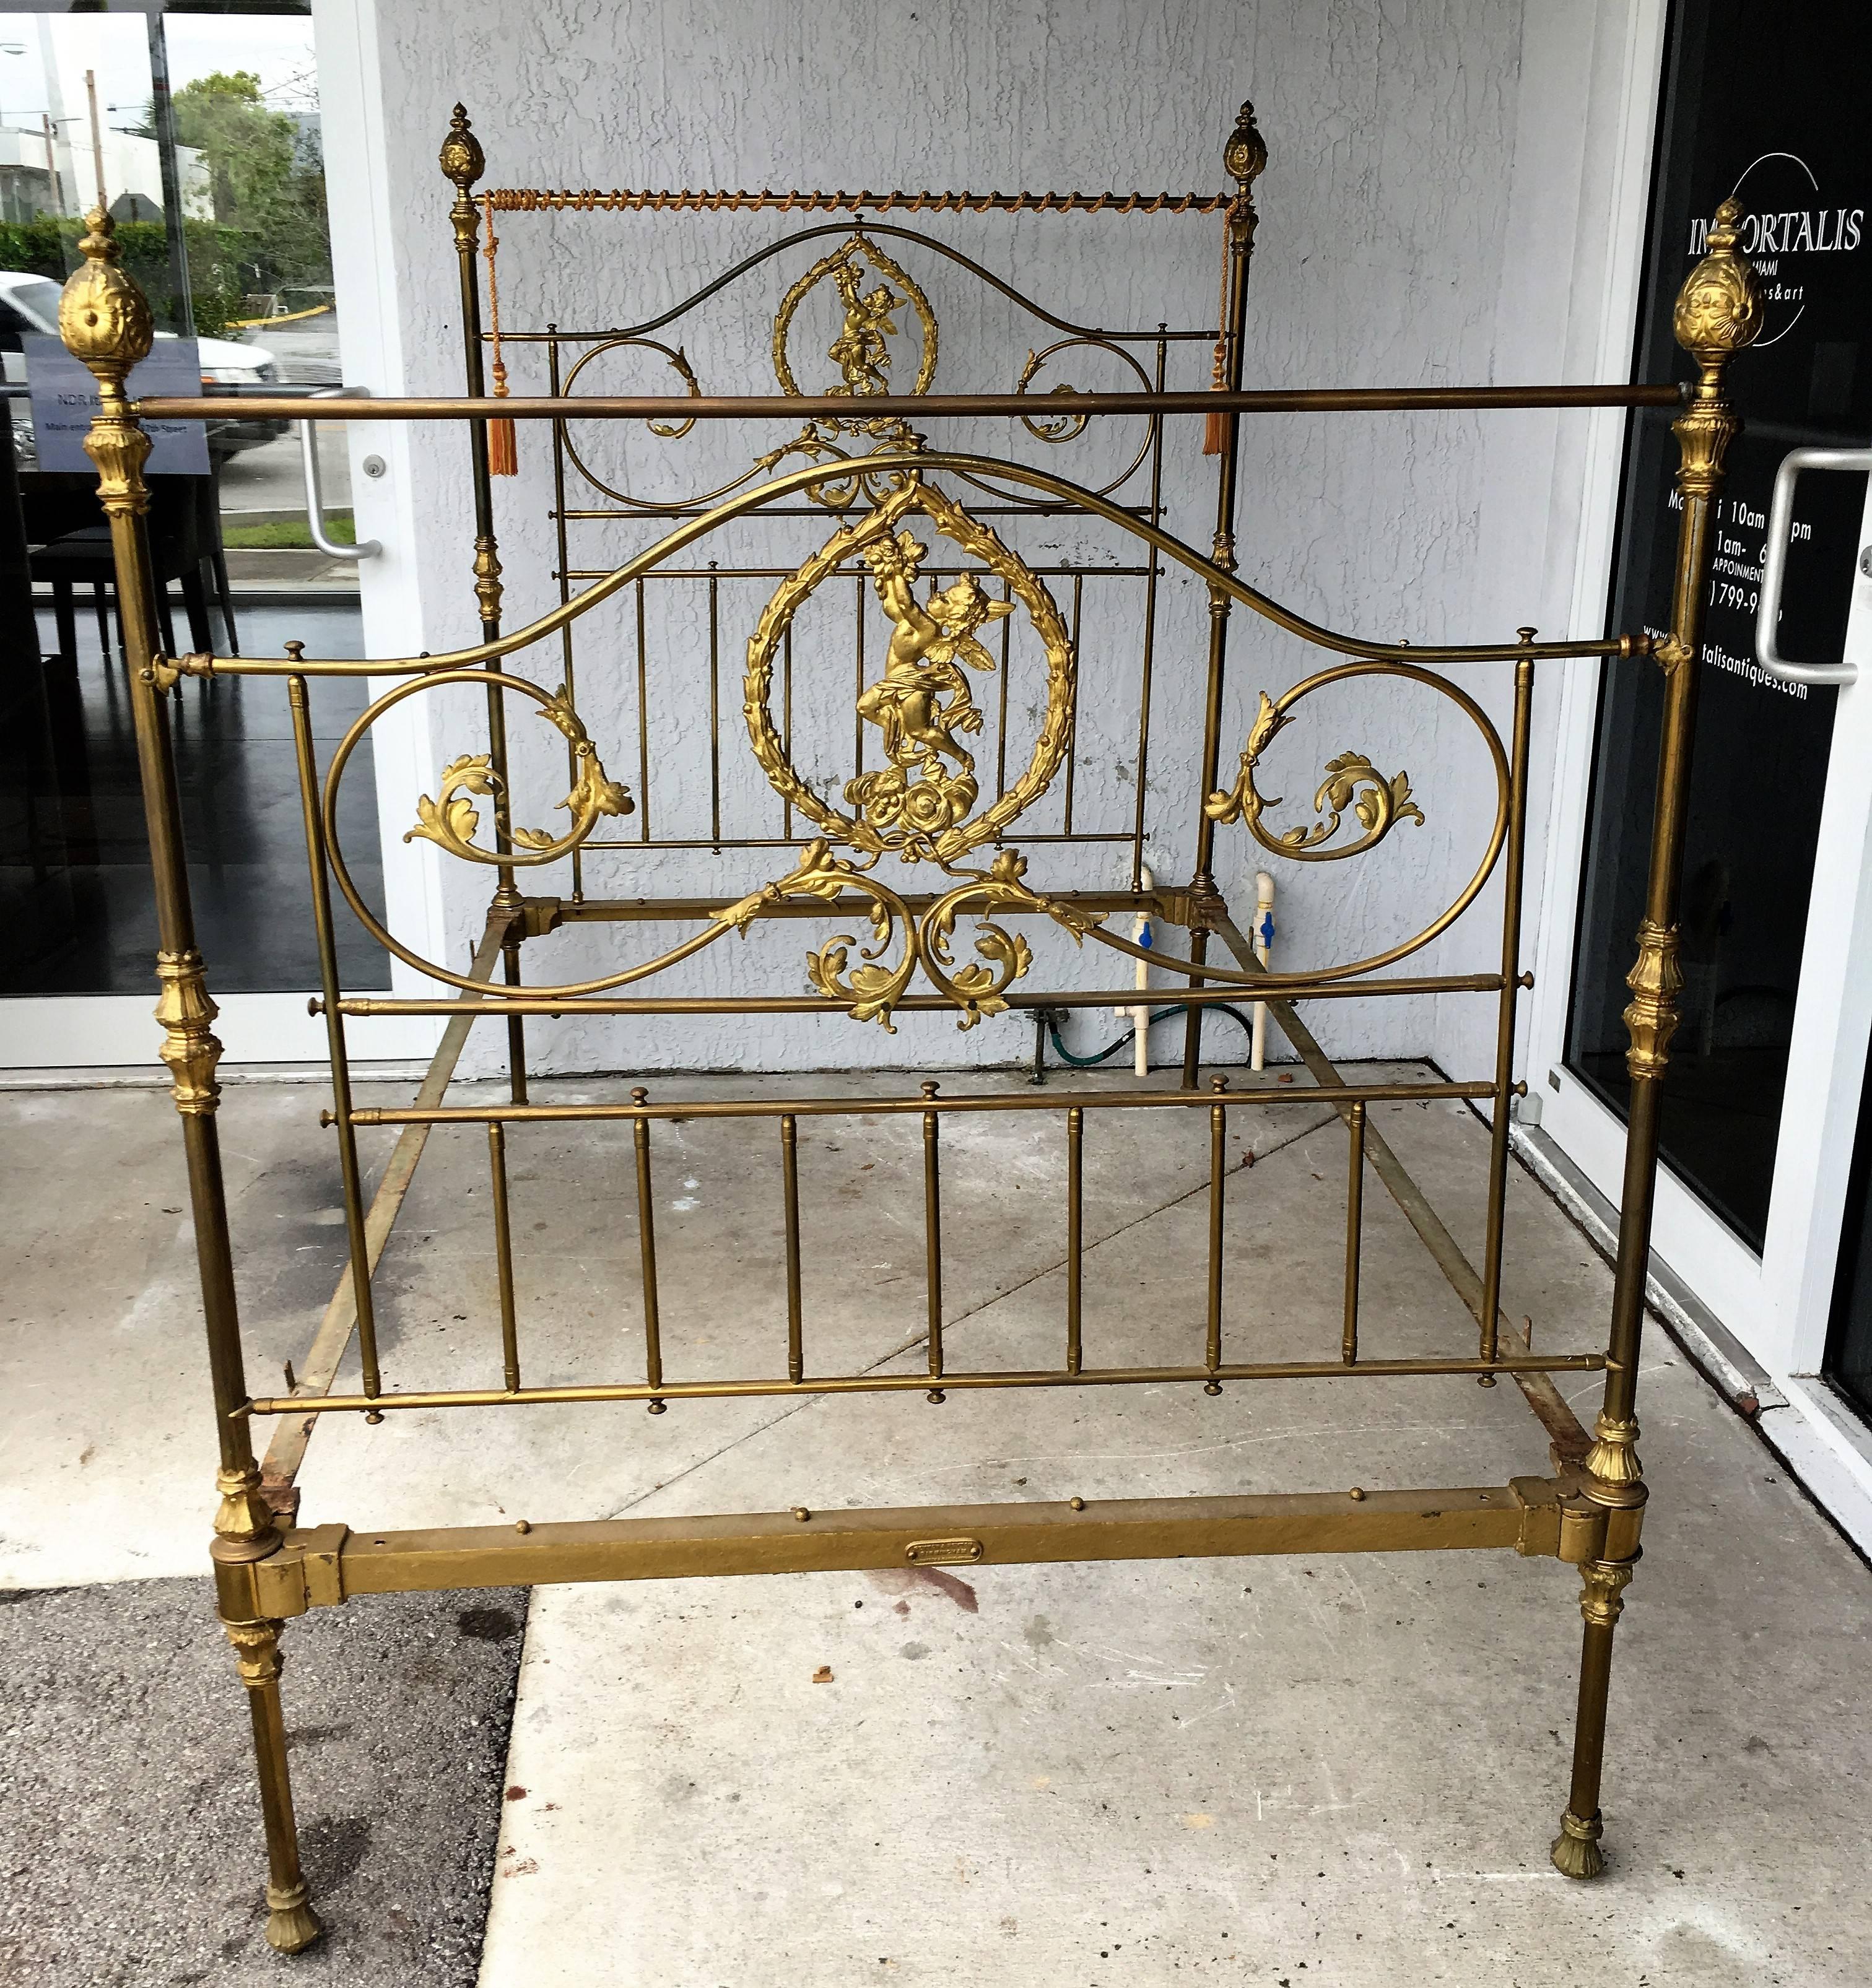 19th century bronze twin bed with cherubs

You can use this like bed or like two headboard if you don´t assembled it.